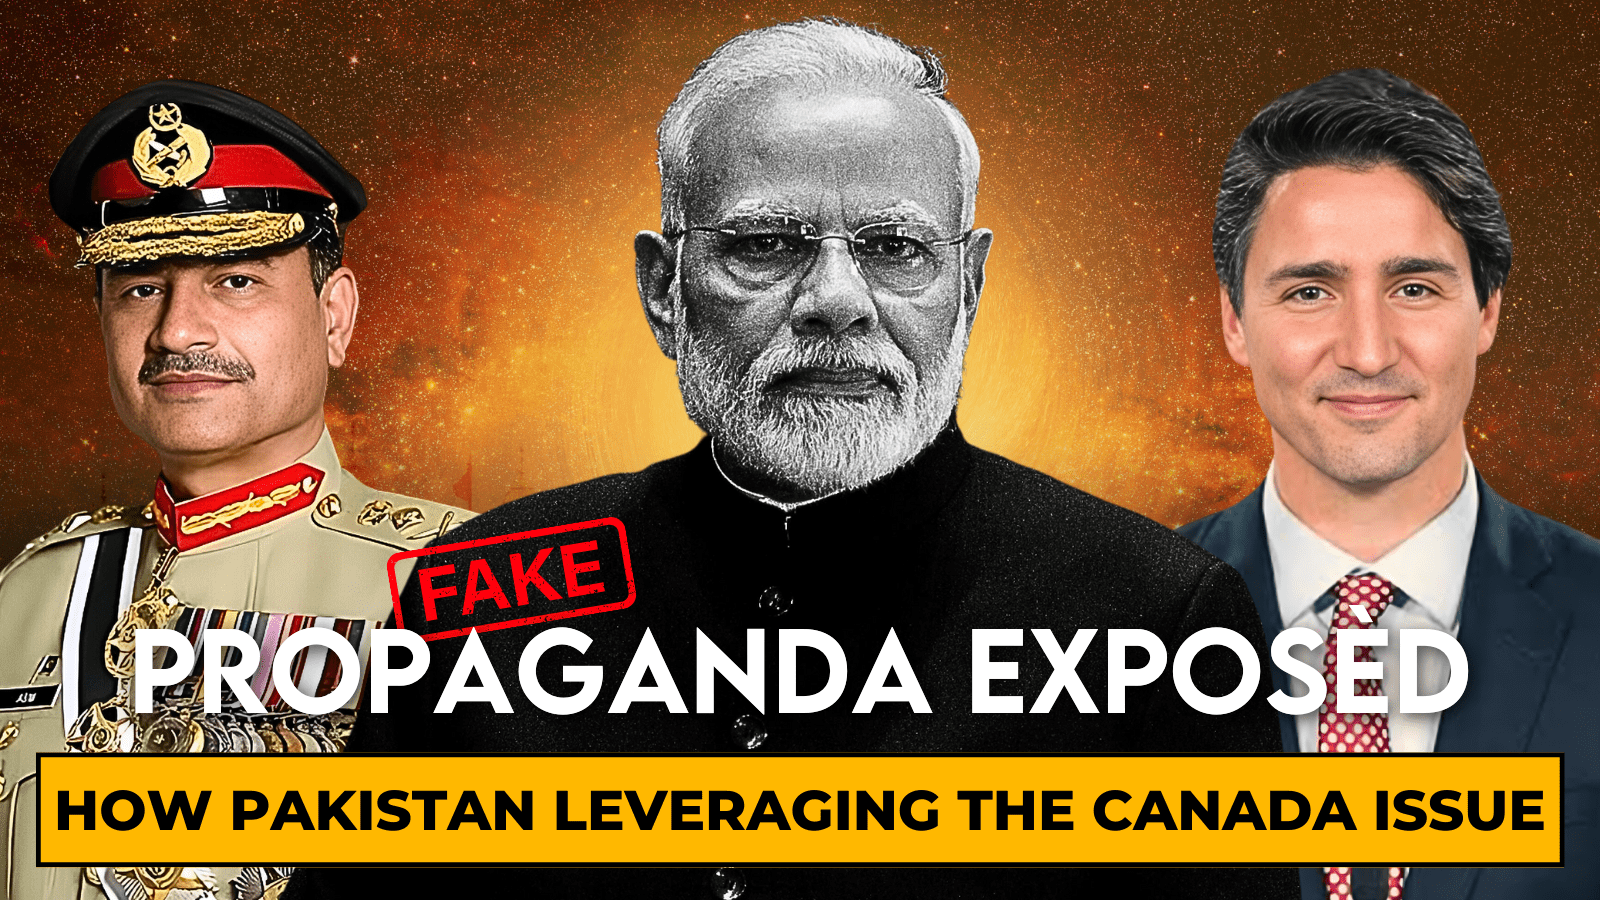 Exposed: A Pakistani Impersonating an Indian Citizen Circulate Fake News About Indian Army Has Been Uncovered